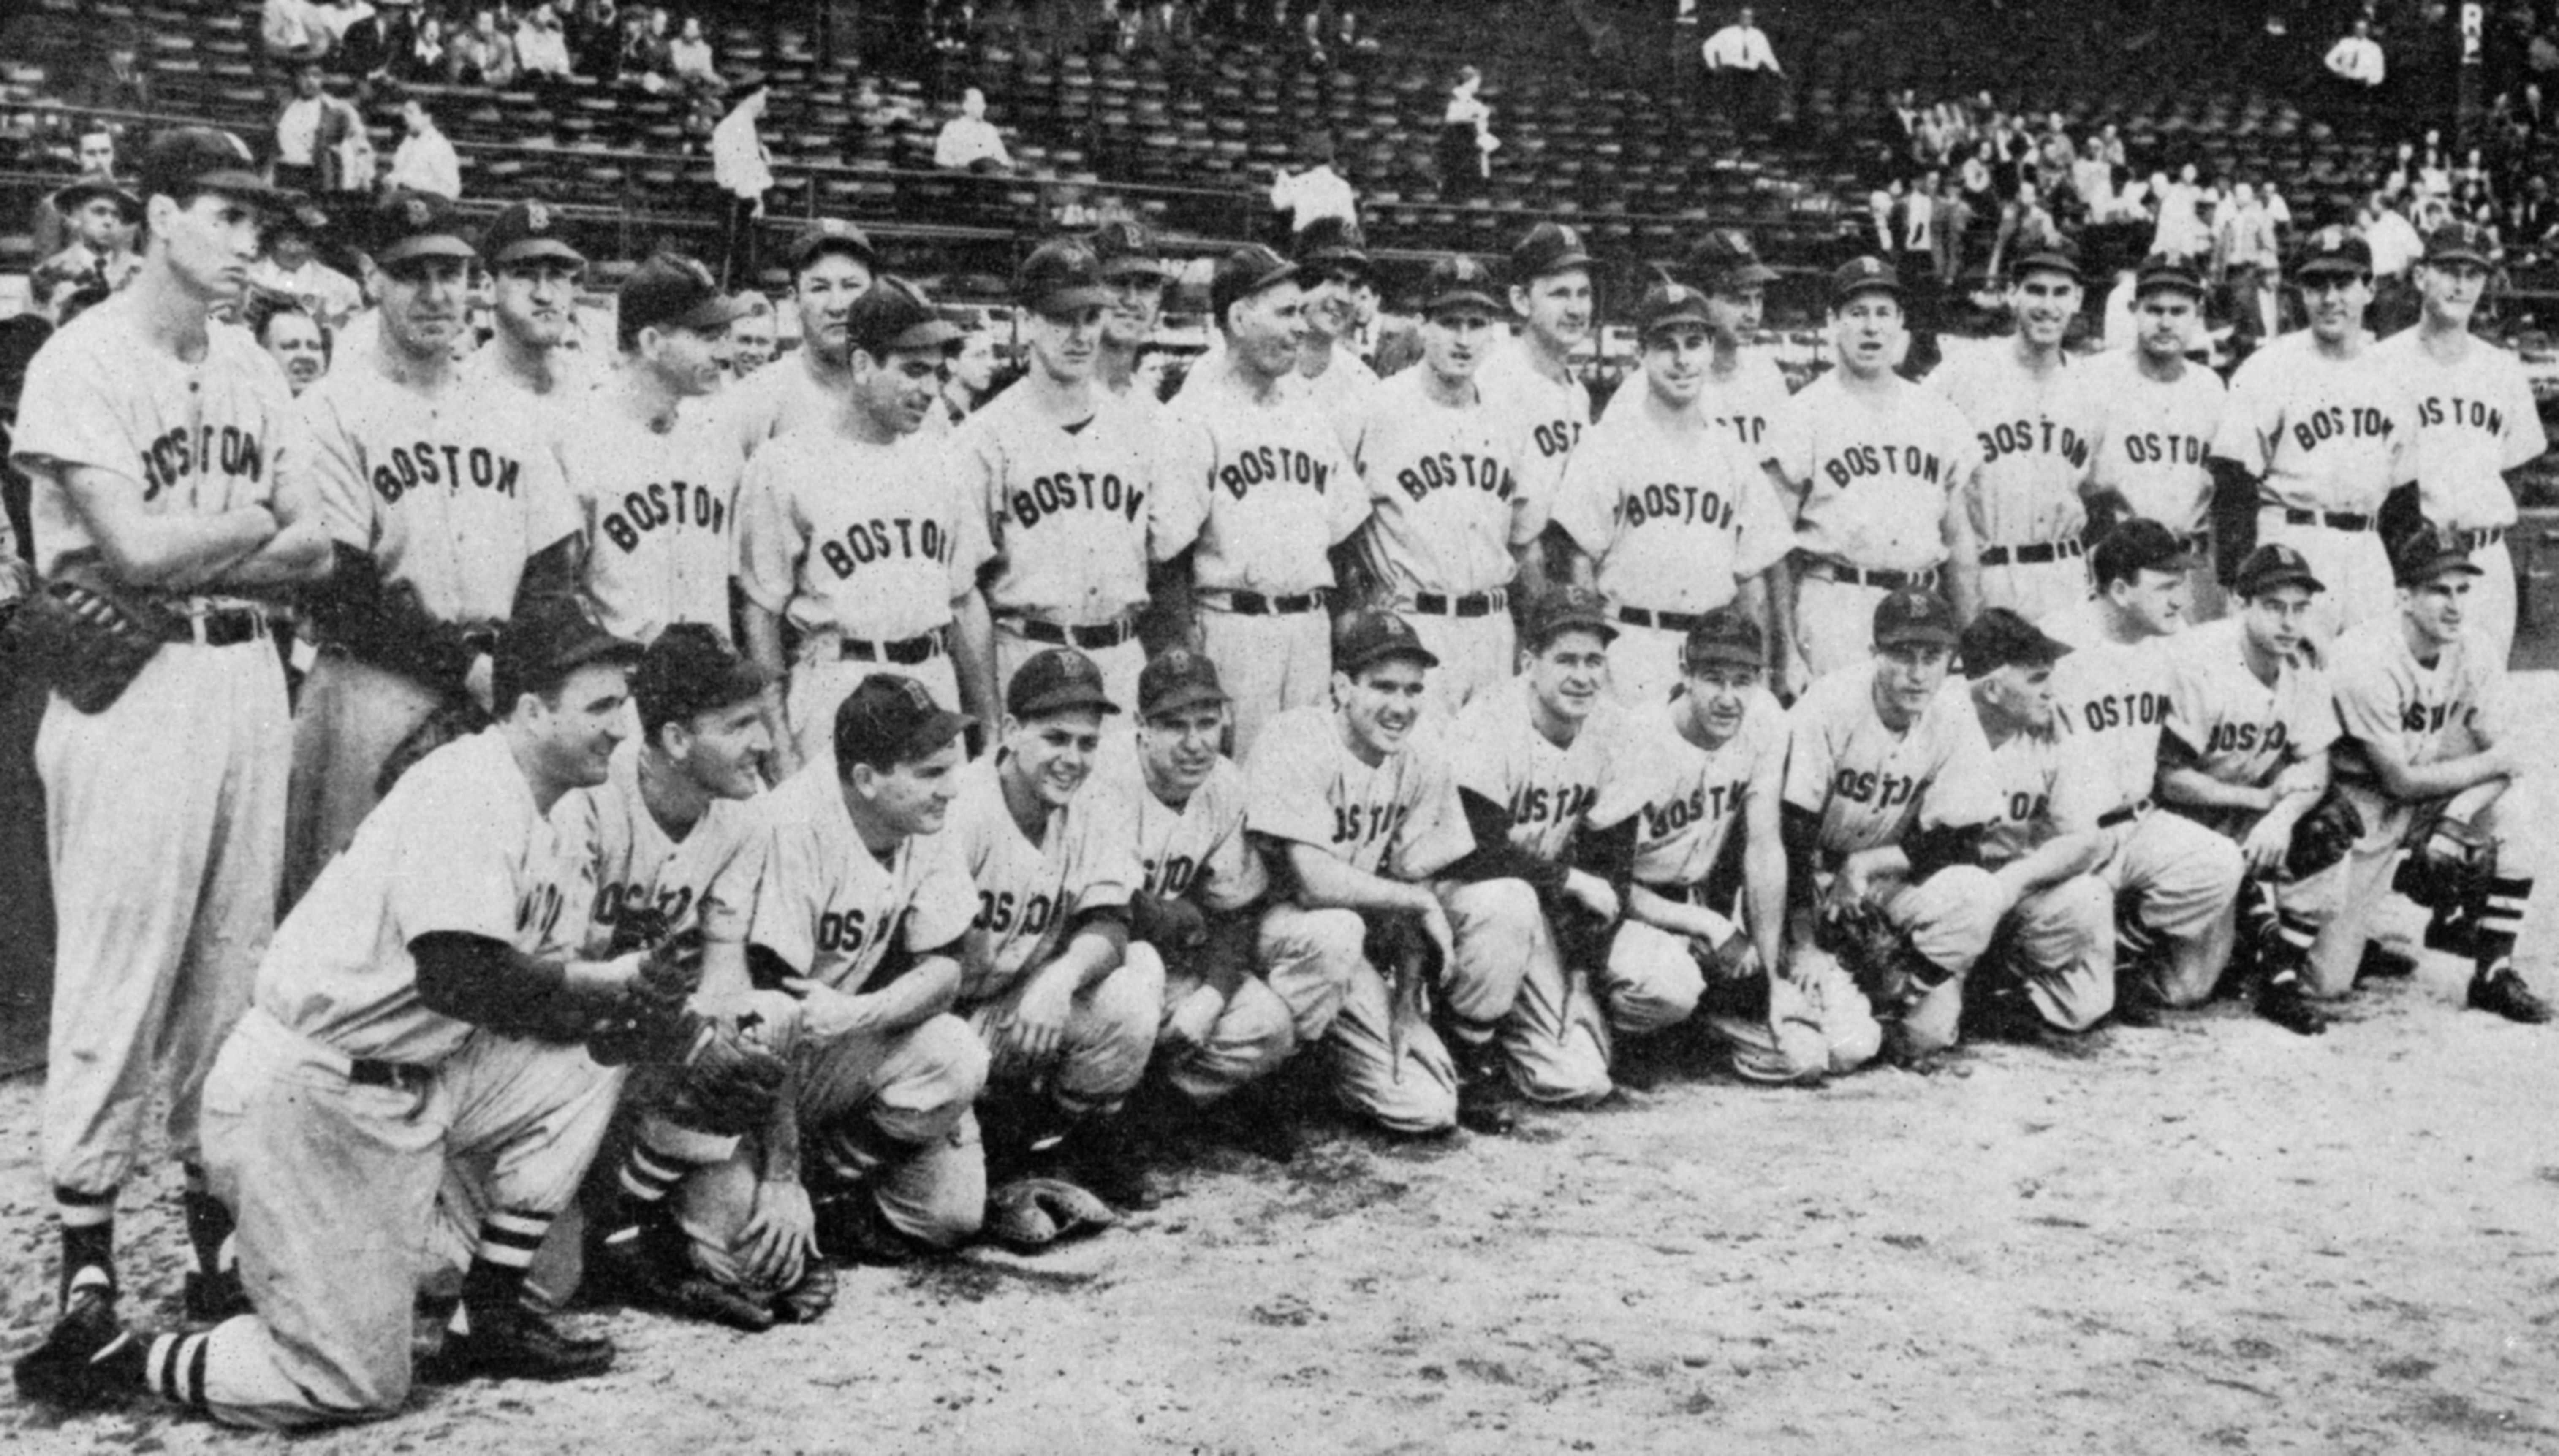 Dodgers of '55 gave Brooklyn the chance to cheer